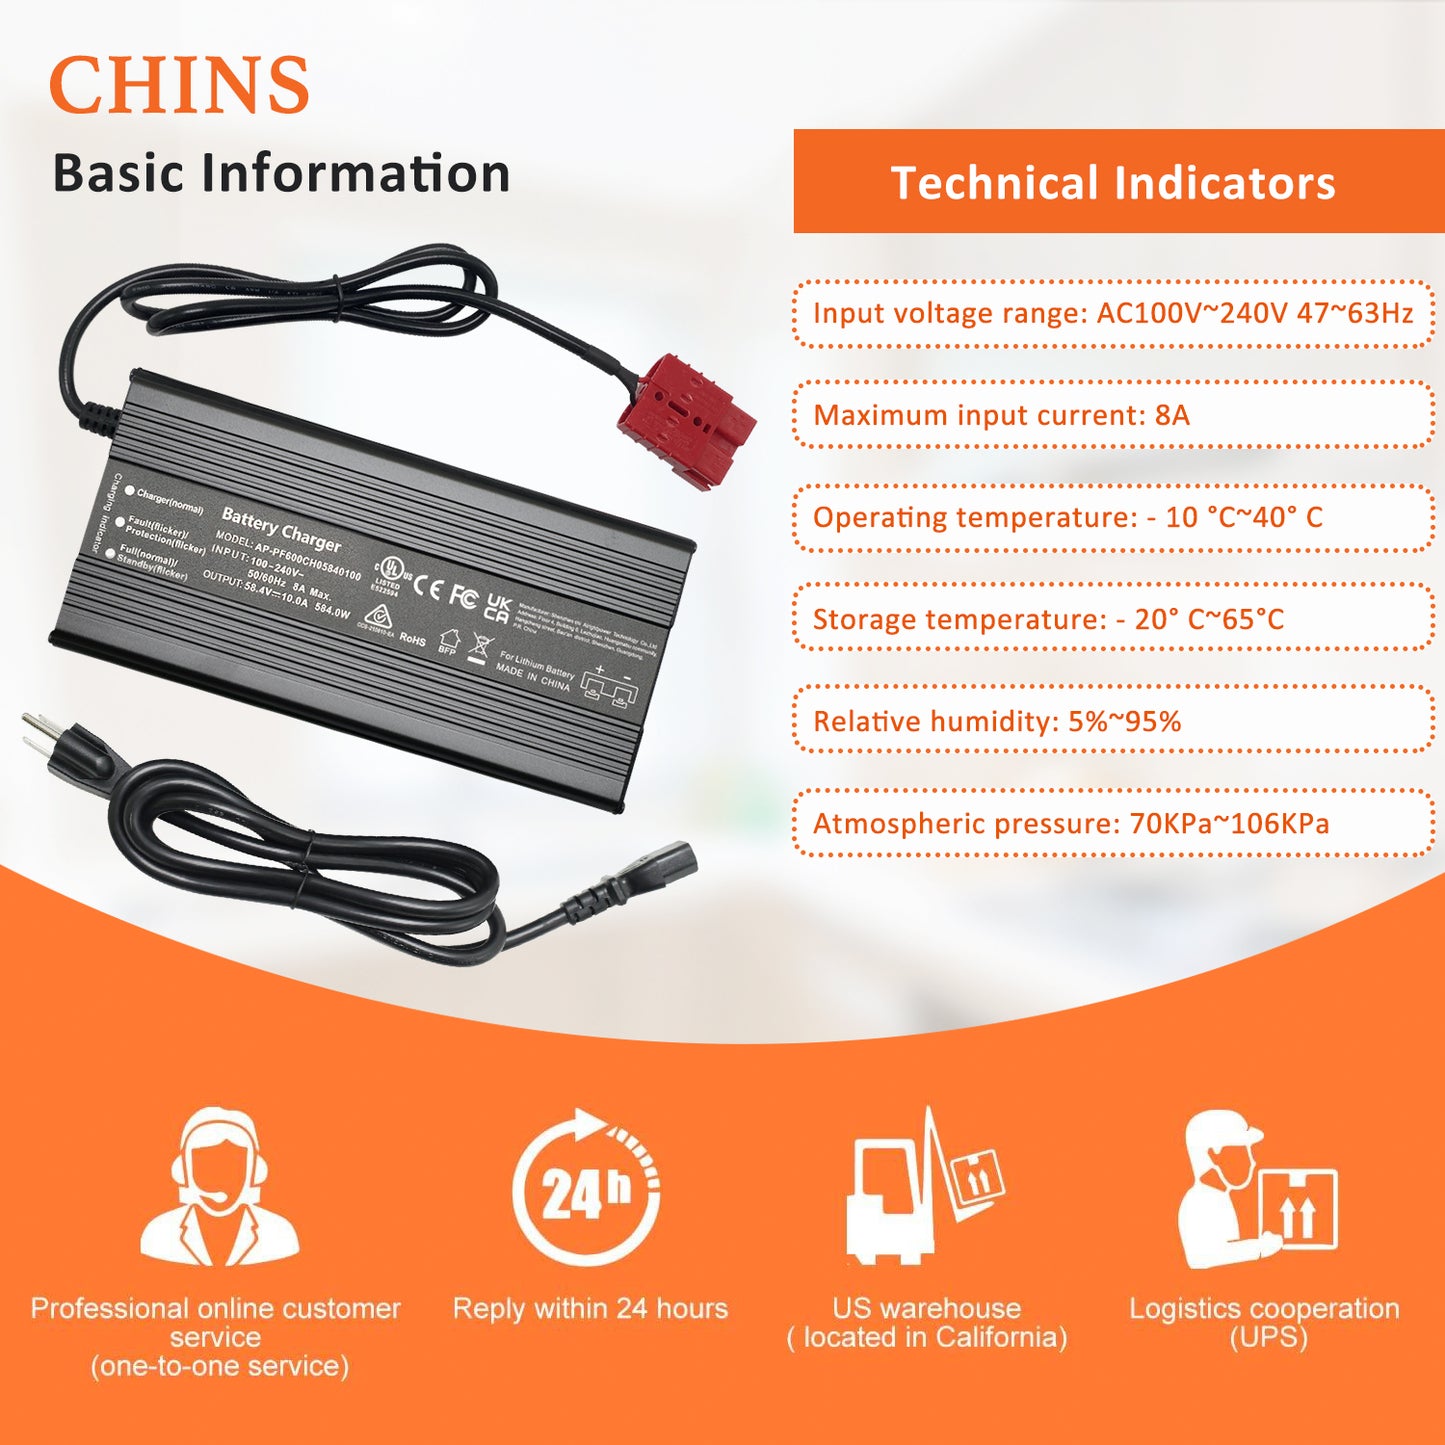 CHINS 48V 10A Lithium Battery Charger, Including UL Certification and 0V Charging Function, 58.4V 10A LiFePO4 Battery Charger, Special for 48V LiFePO4 Battery